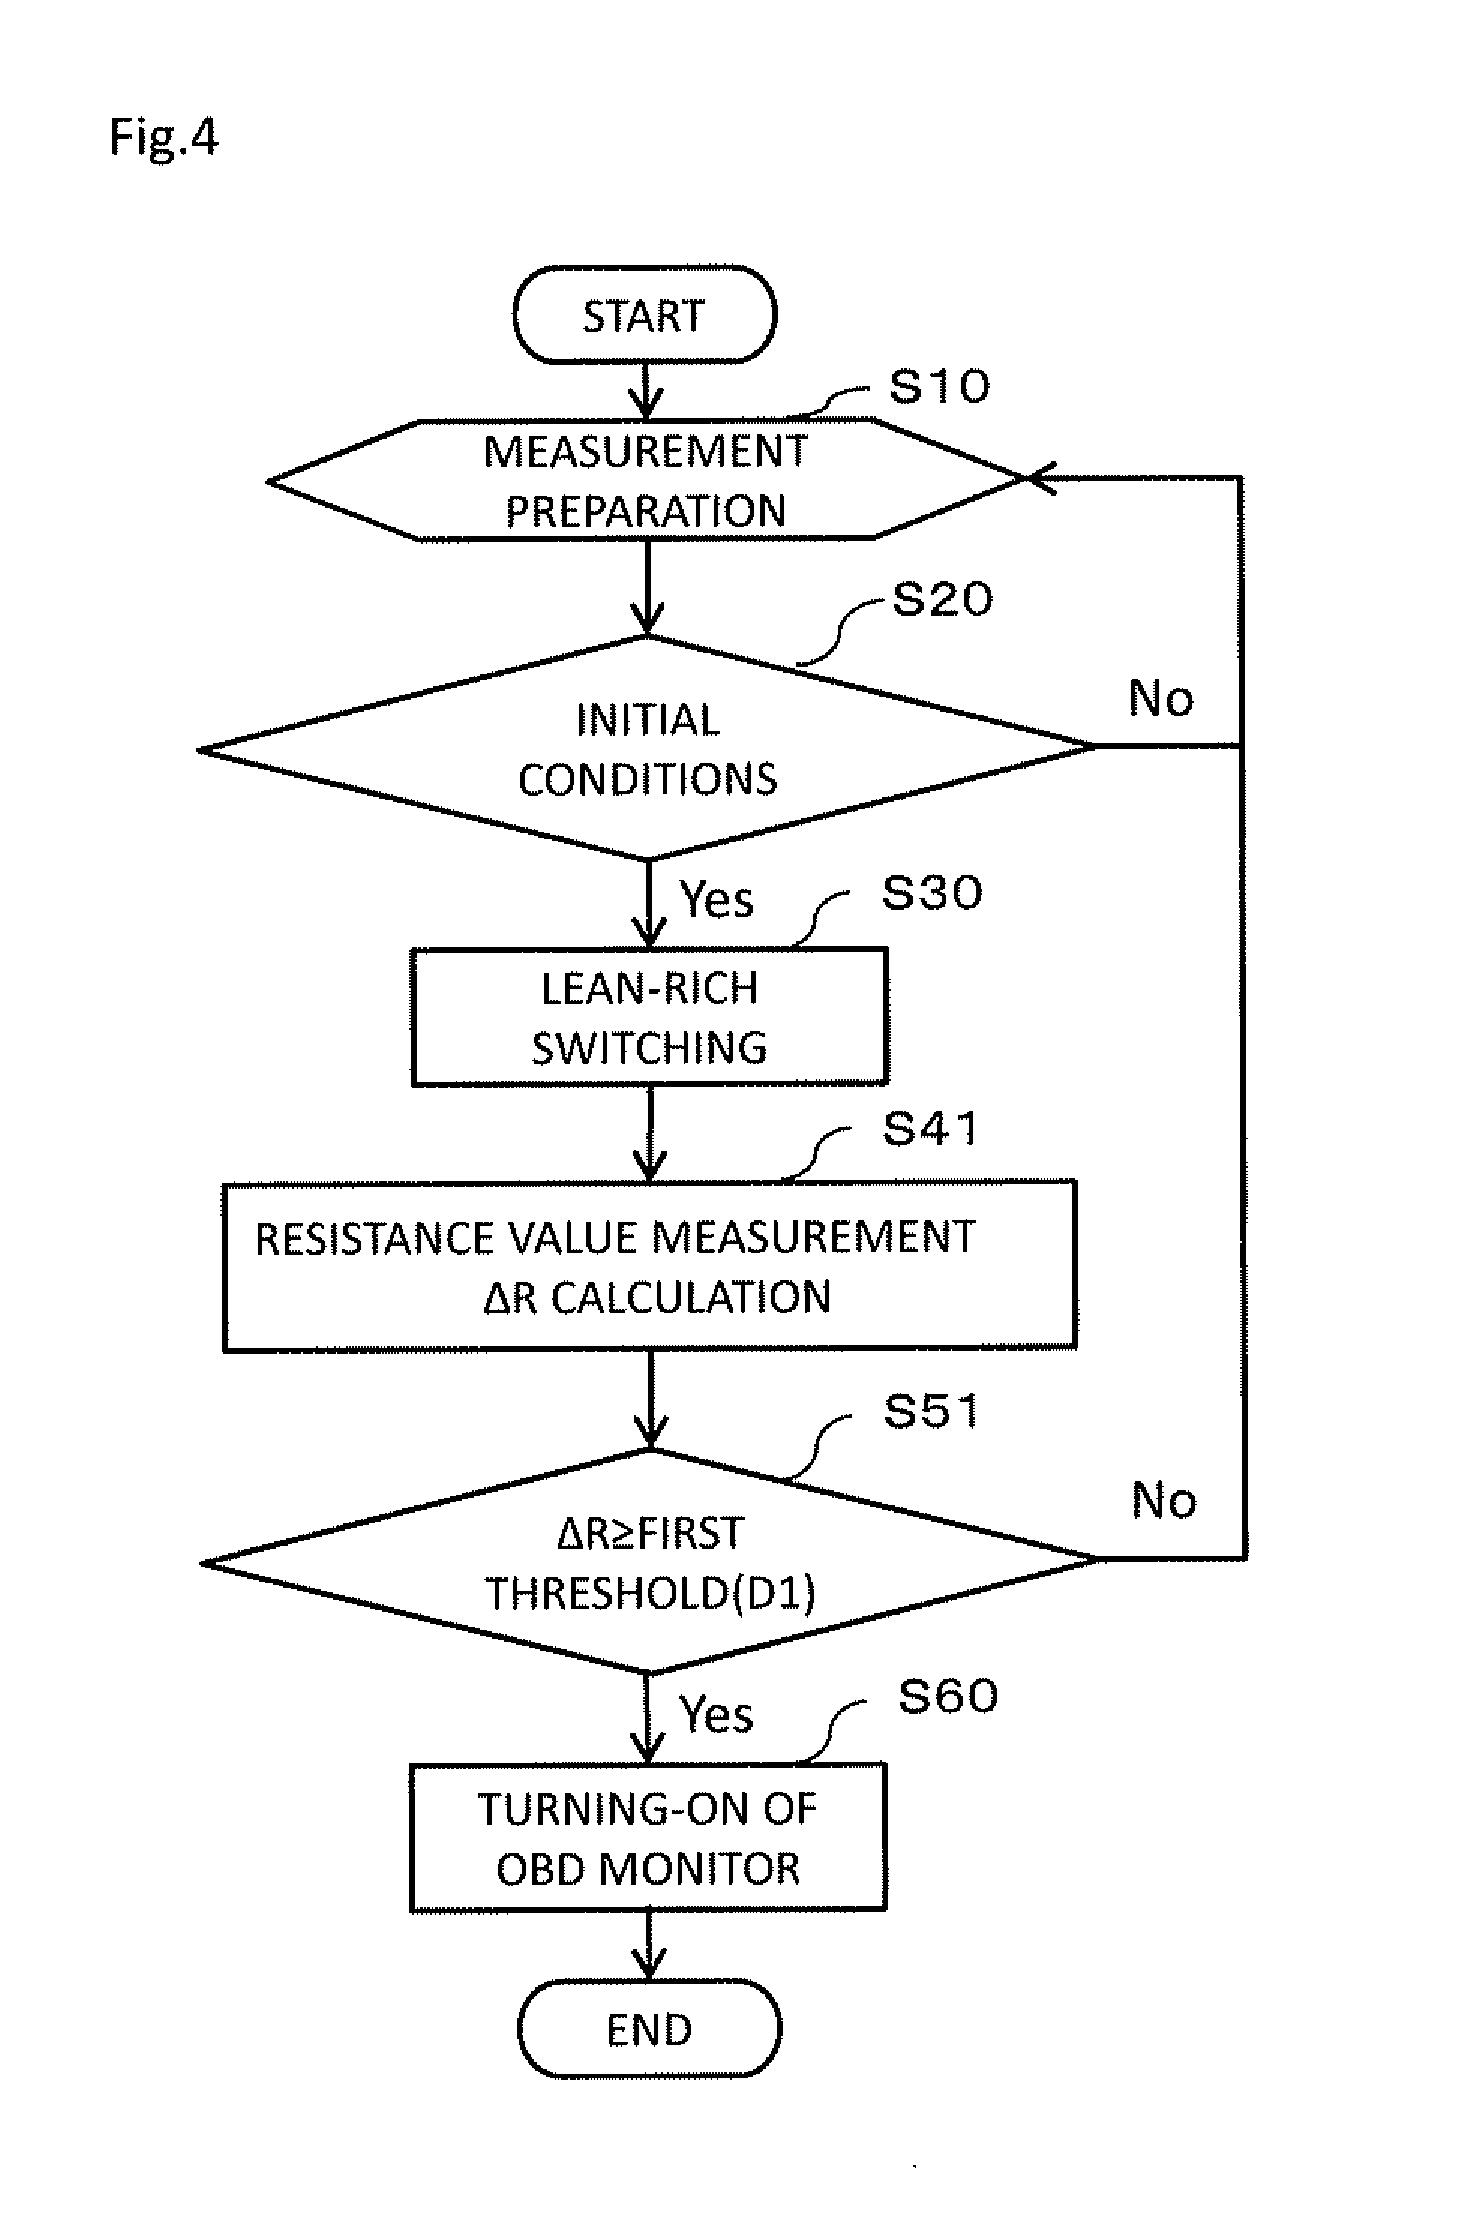 Catalyst deterioration diagnosis method, method for purification of exhaust gas using the diagnosis method, catalyst deterioration diagnosis apparatus, and apparatus for purification of exhaust gas using the diagnosis apparatus